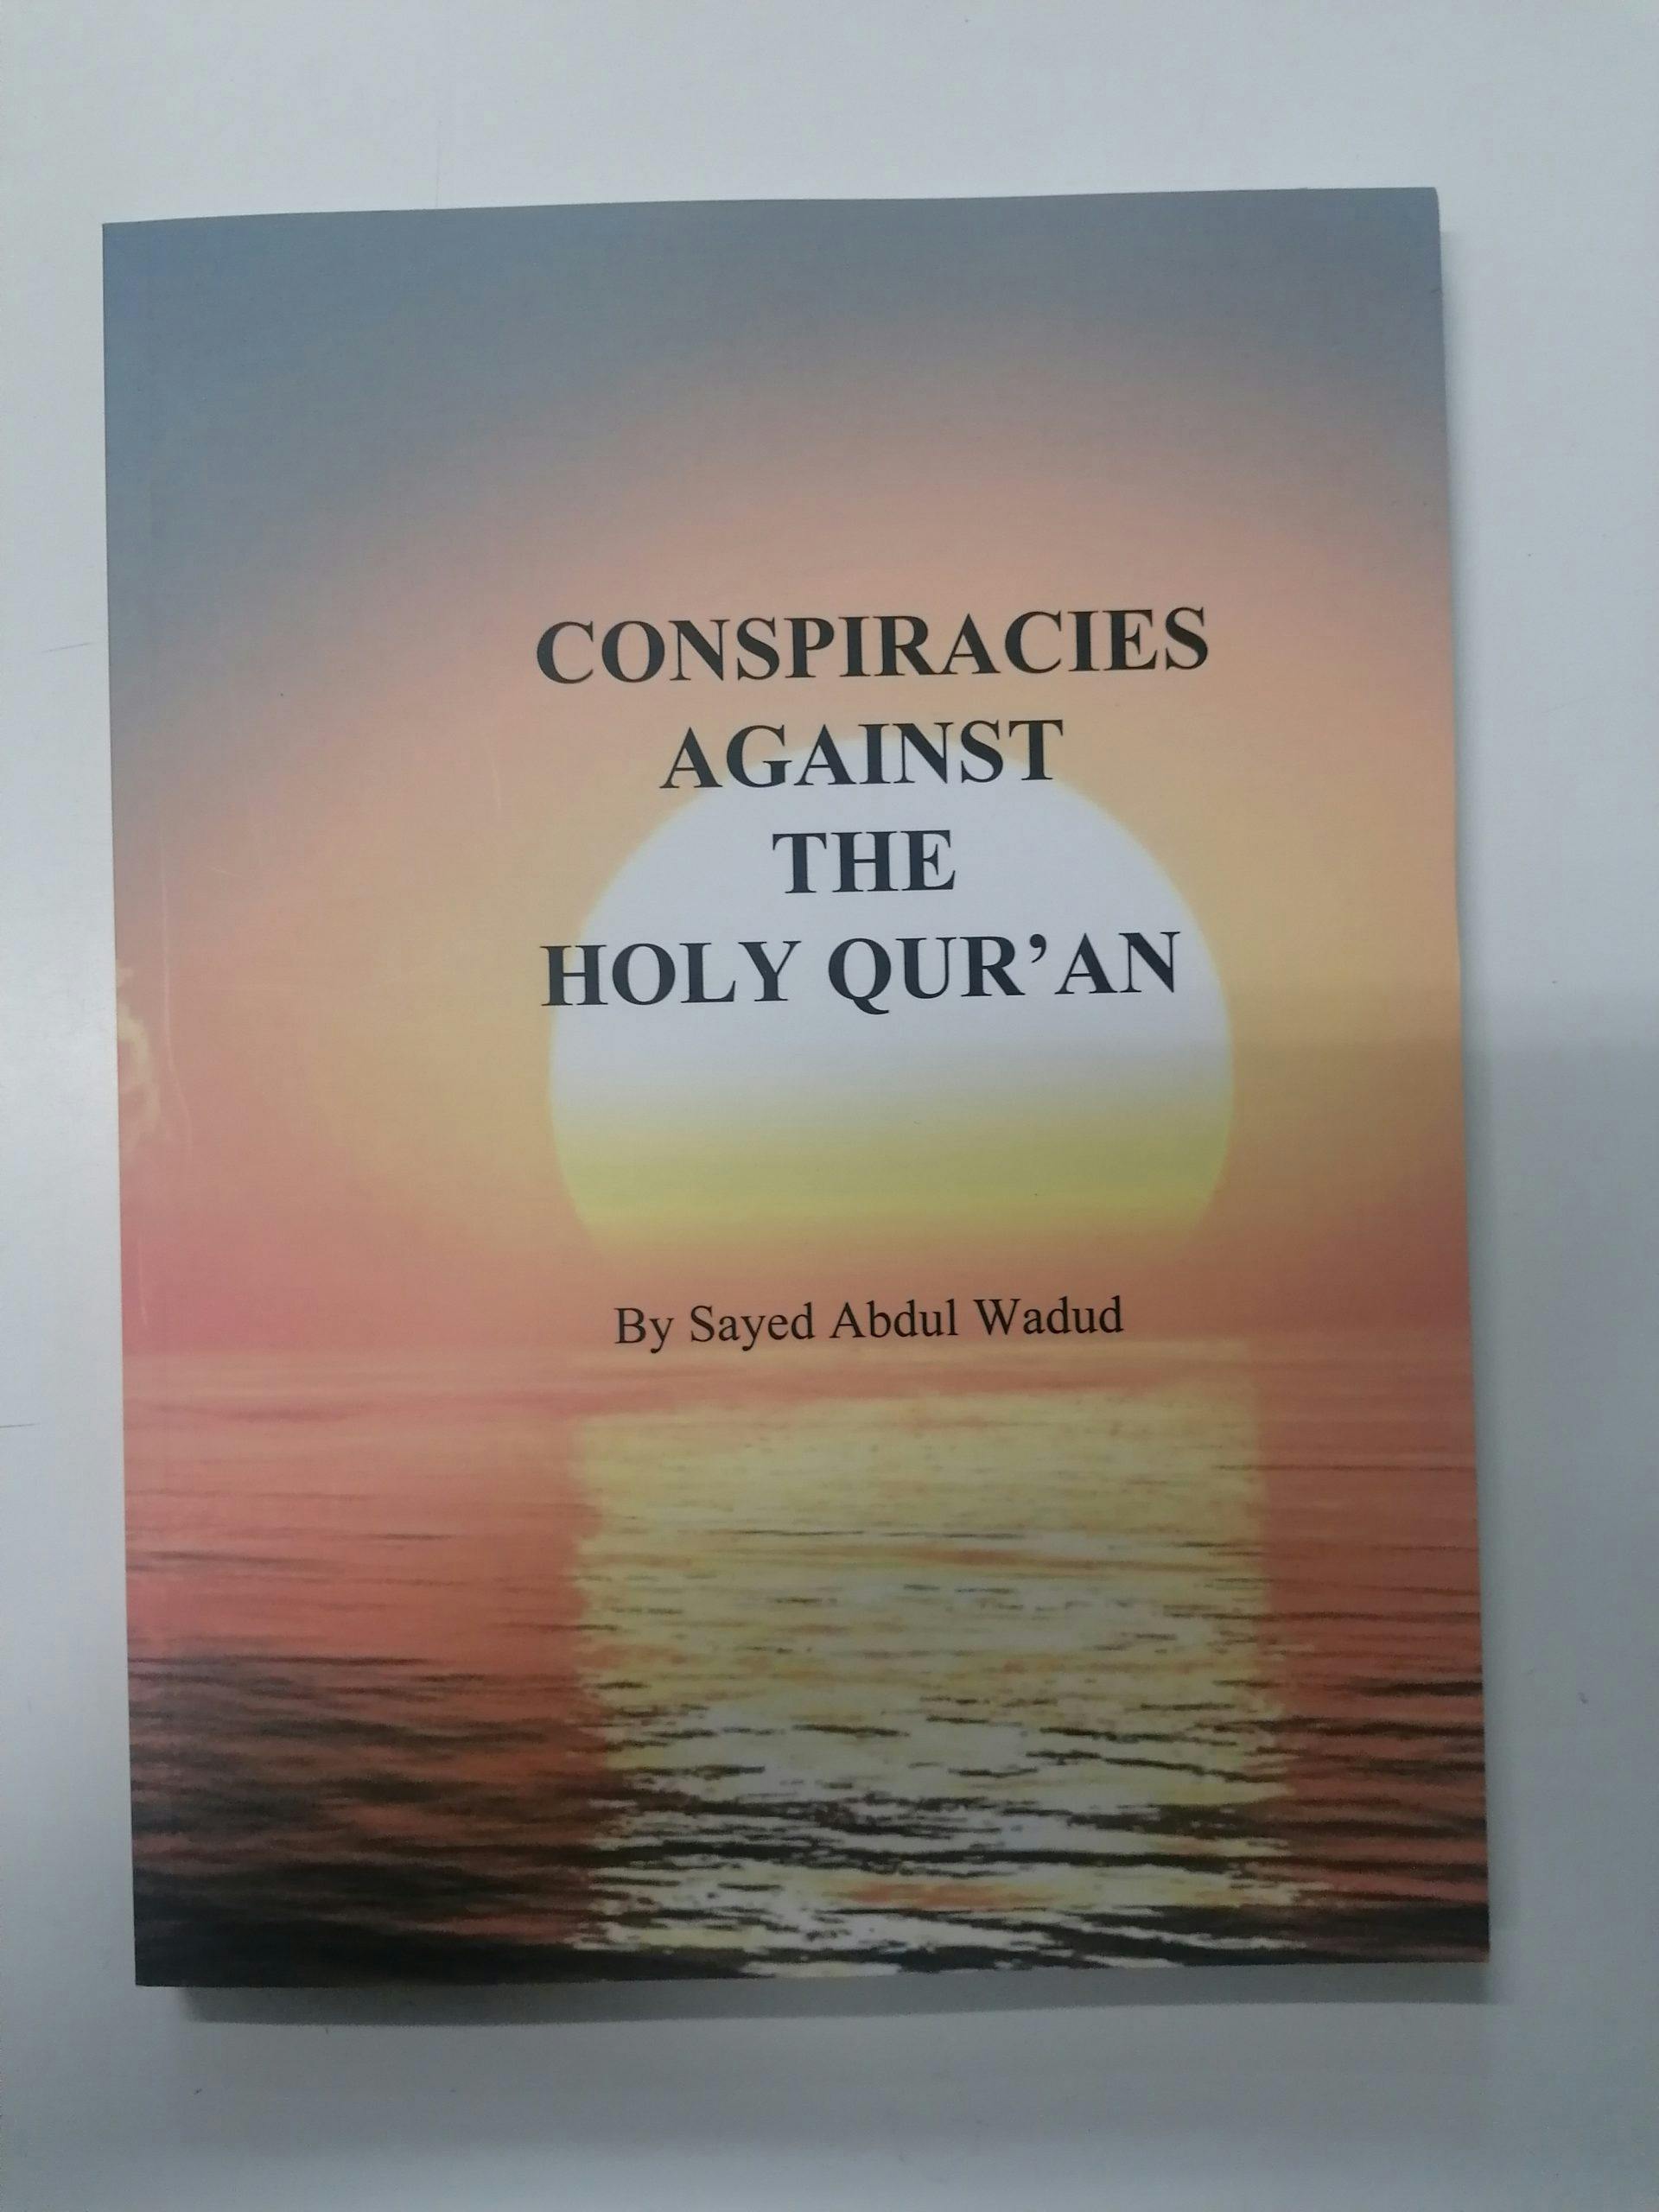 Featured image of Conspiracies Against The Holy Qura'an